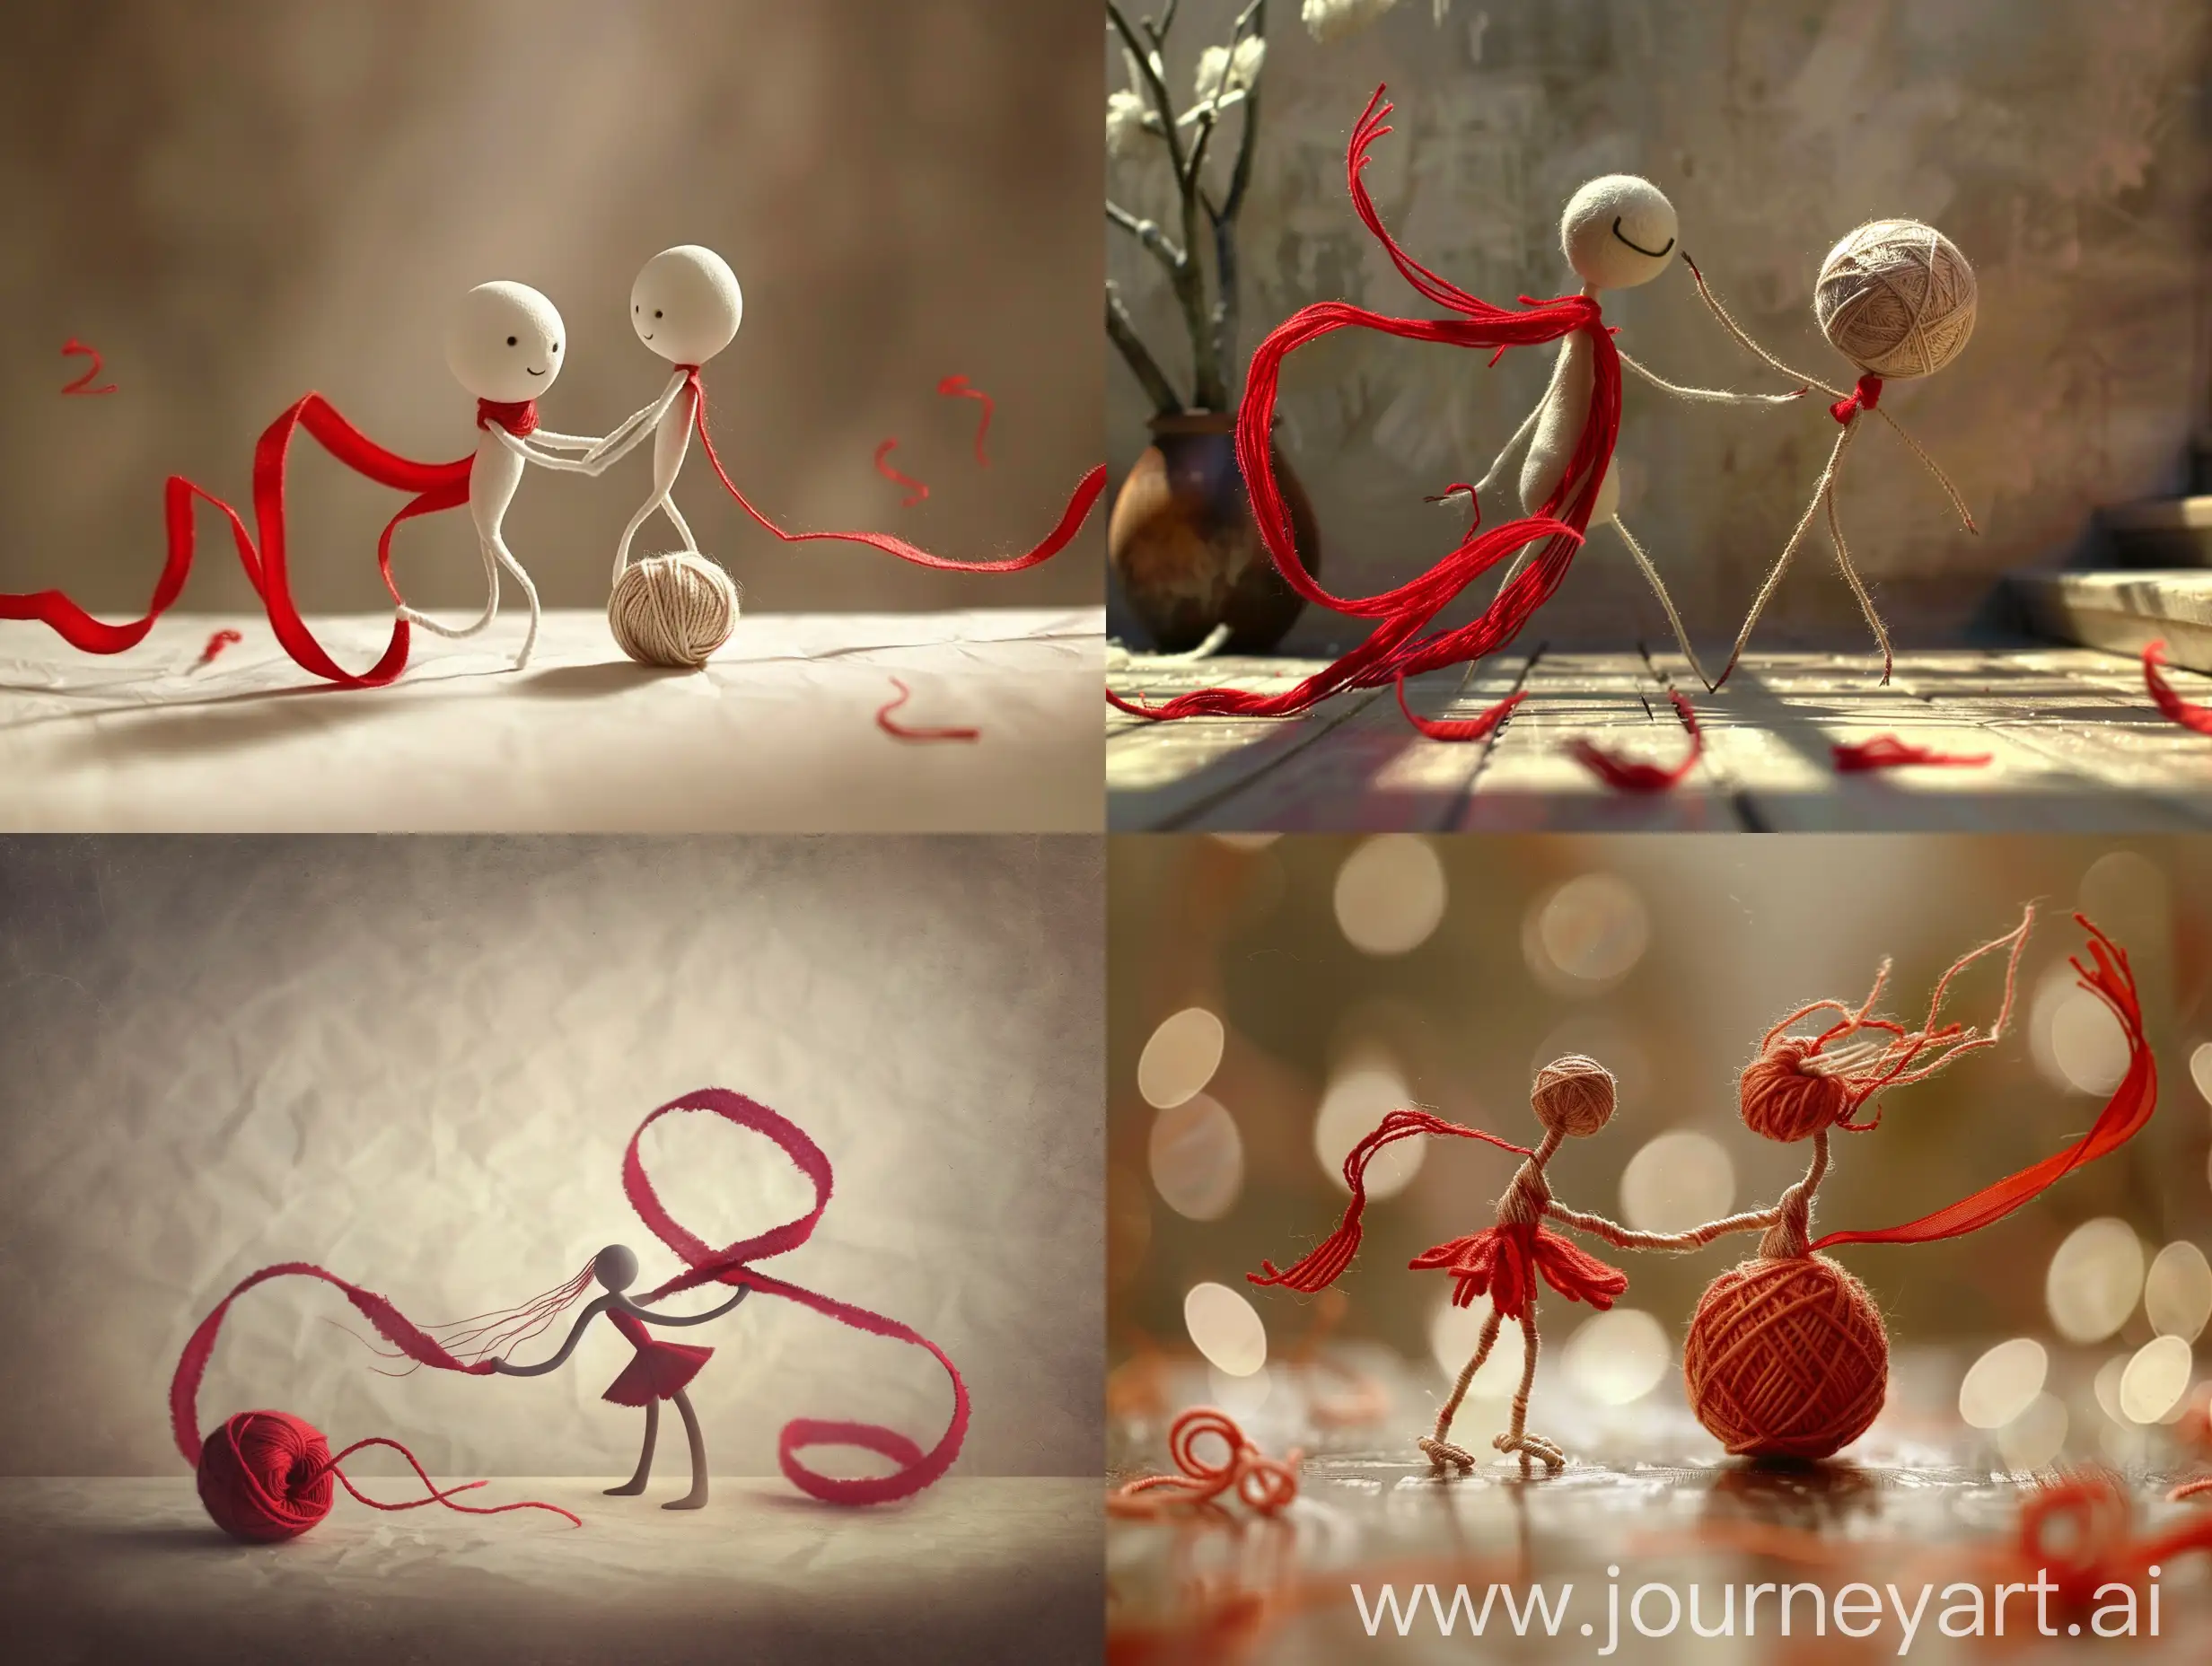 Enchanted-Red-Ribbon-Dancing-with-Ball-of-Yarn-in-Tender-Moment